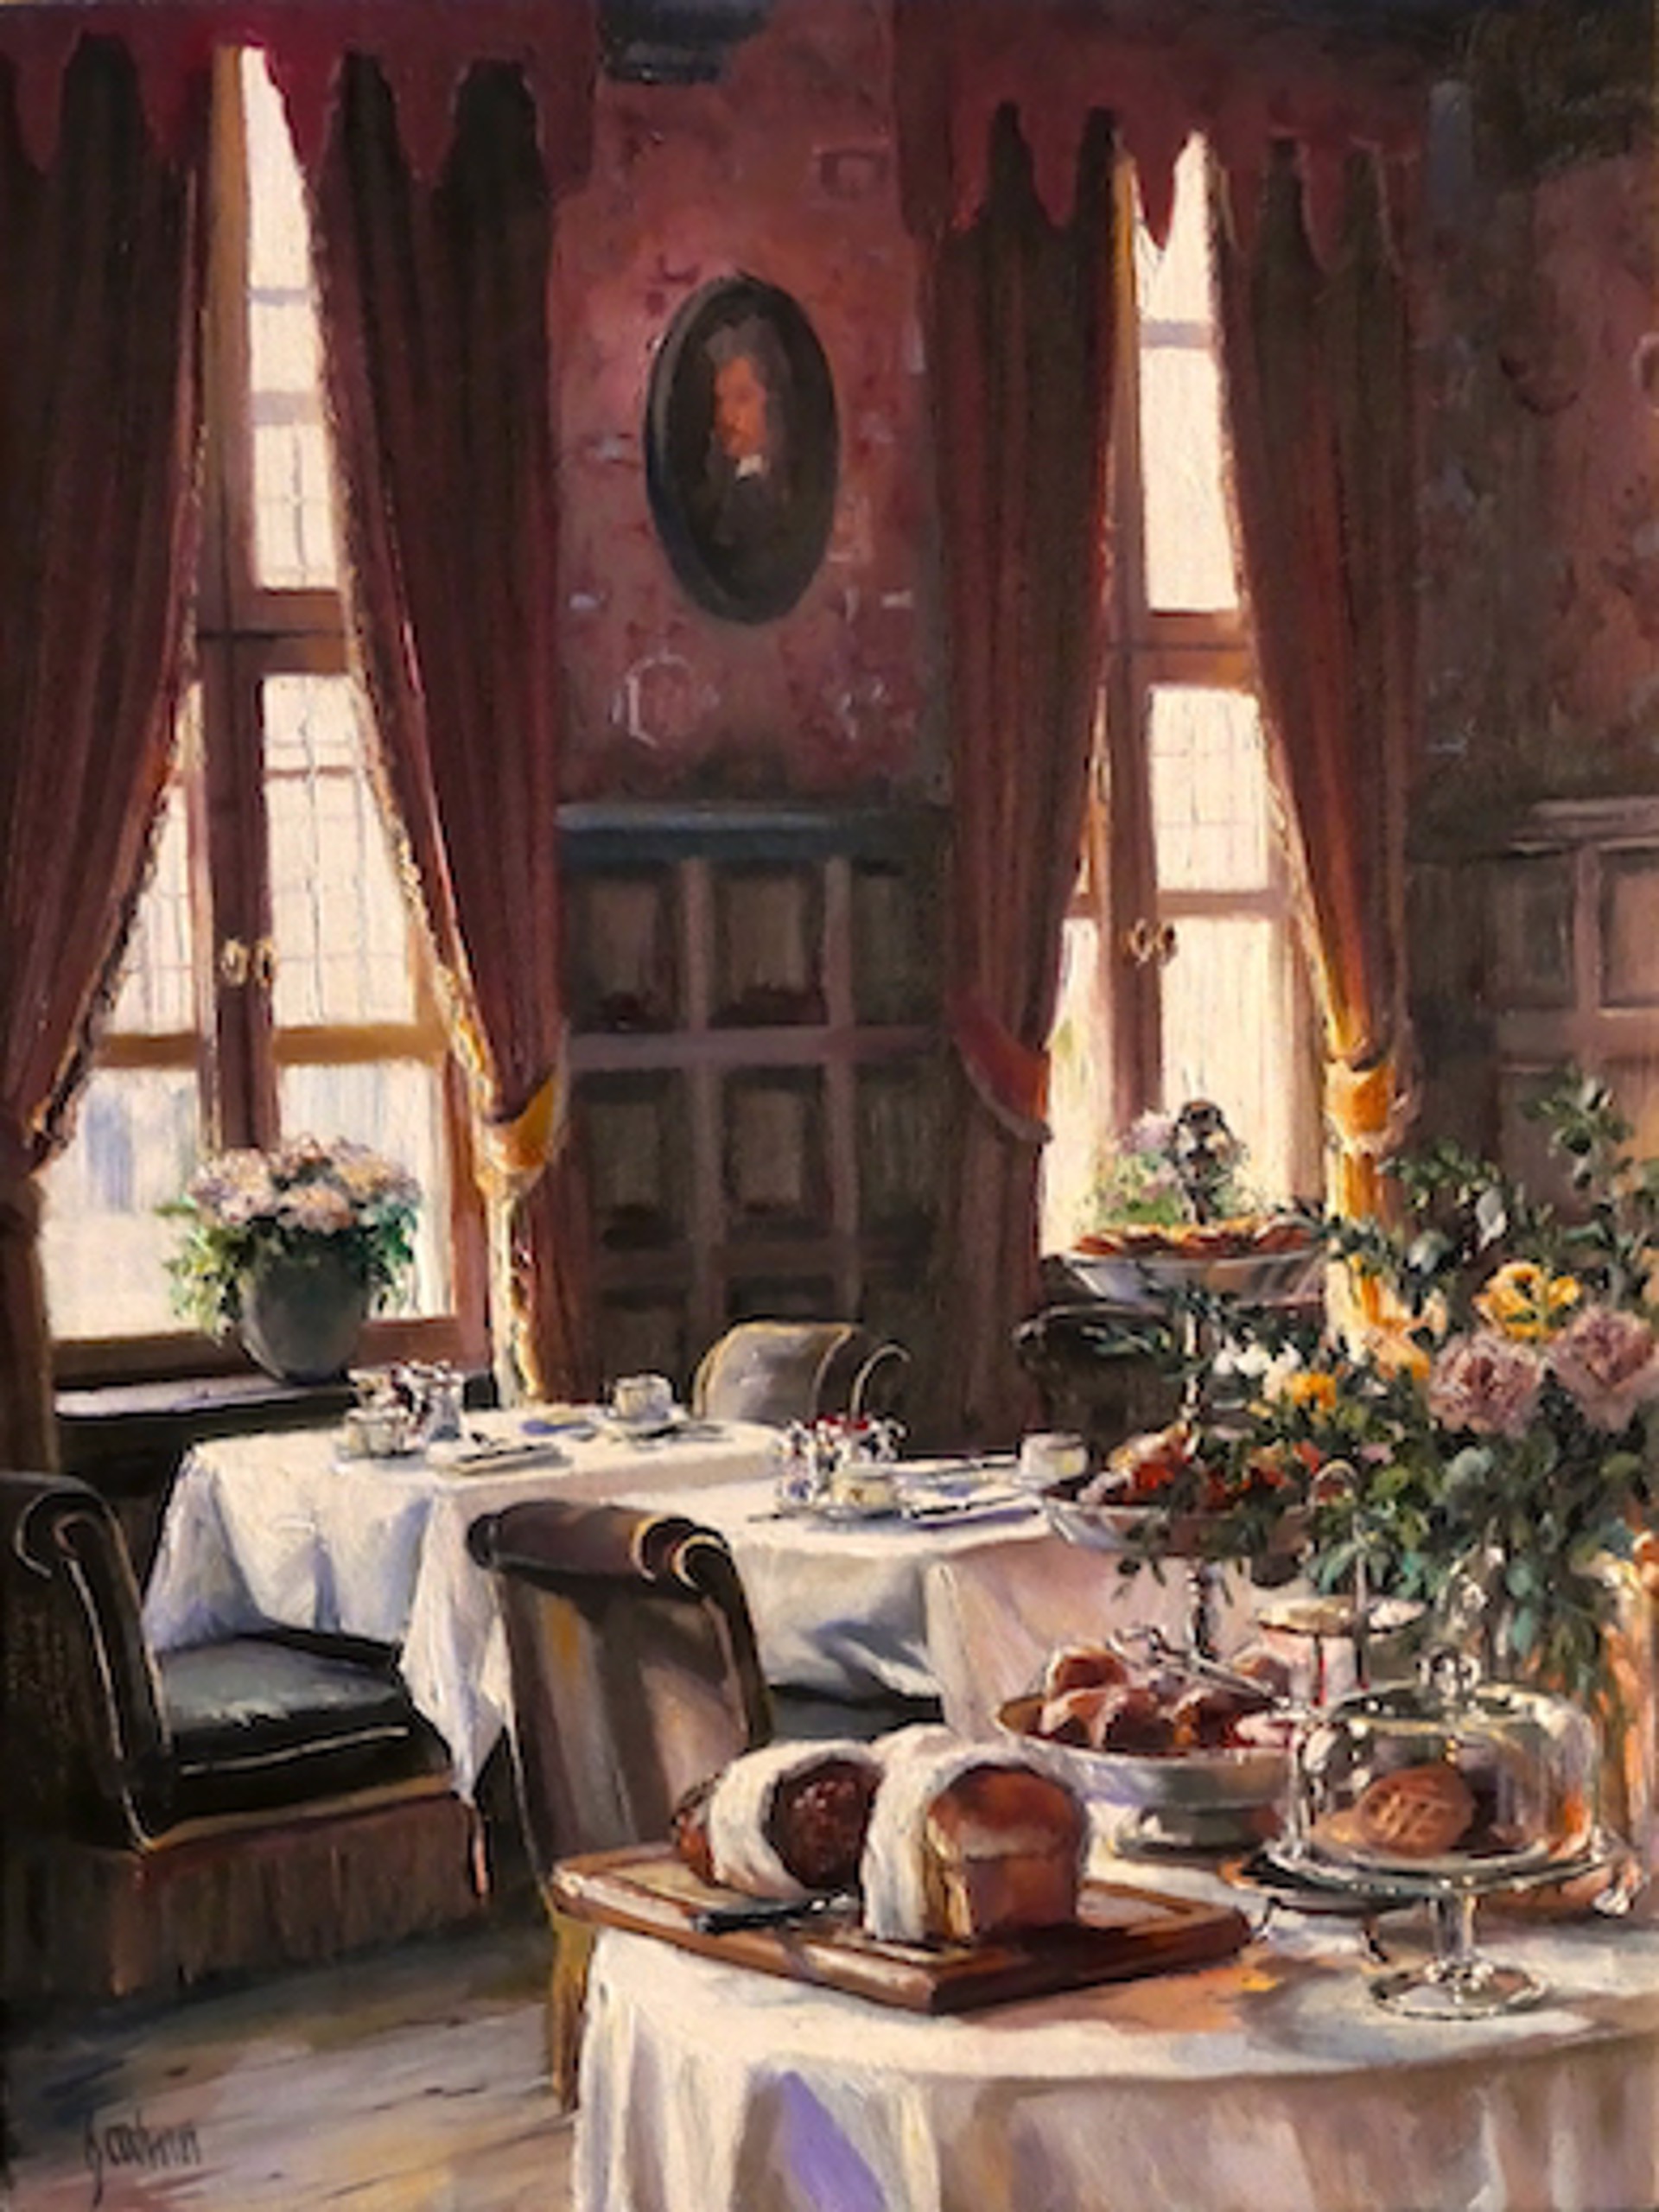 Breakfast at the Orangerie, Bruges by Lindsay Goodwin